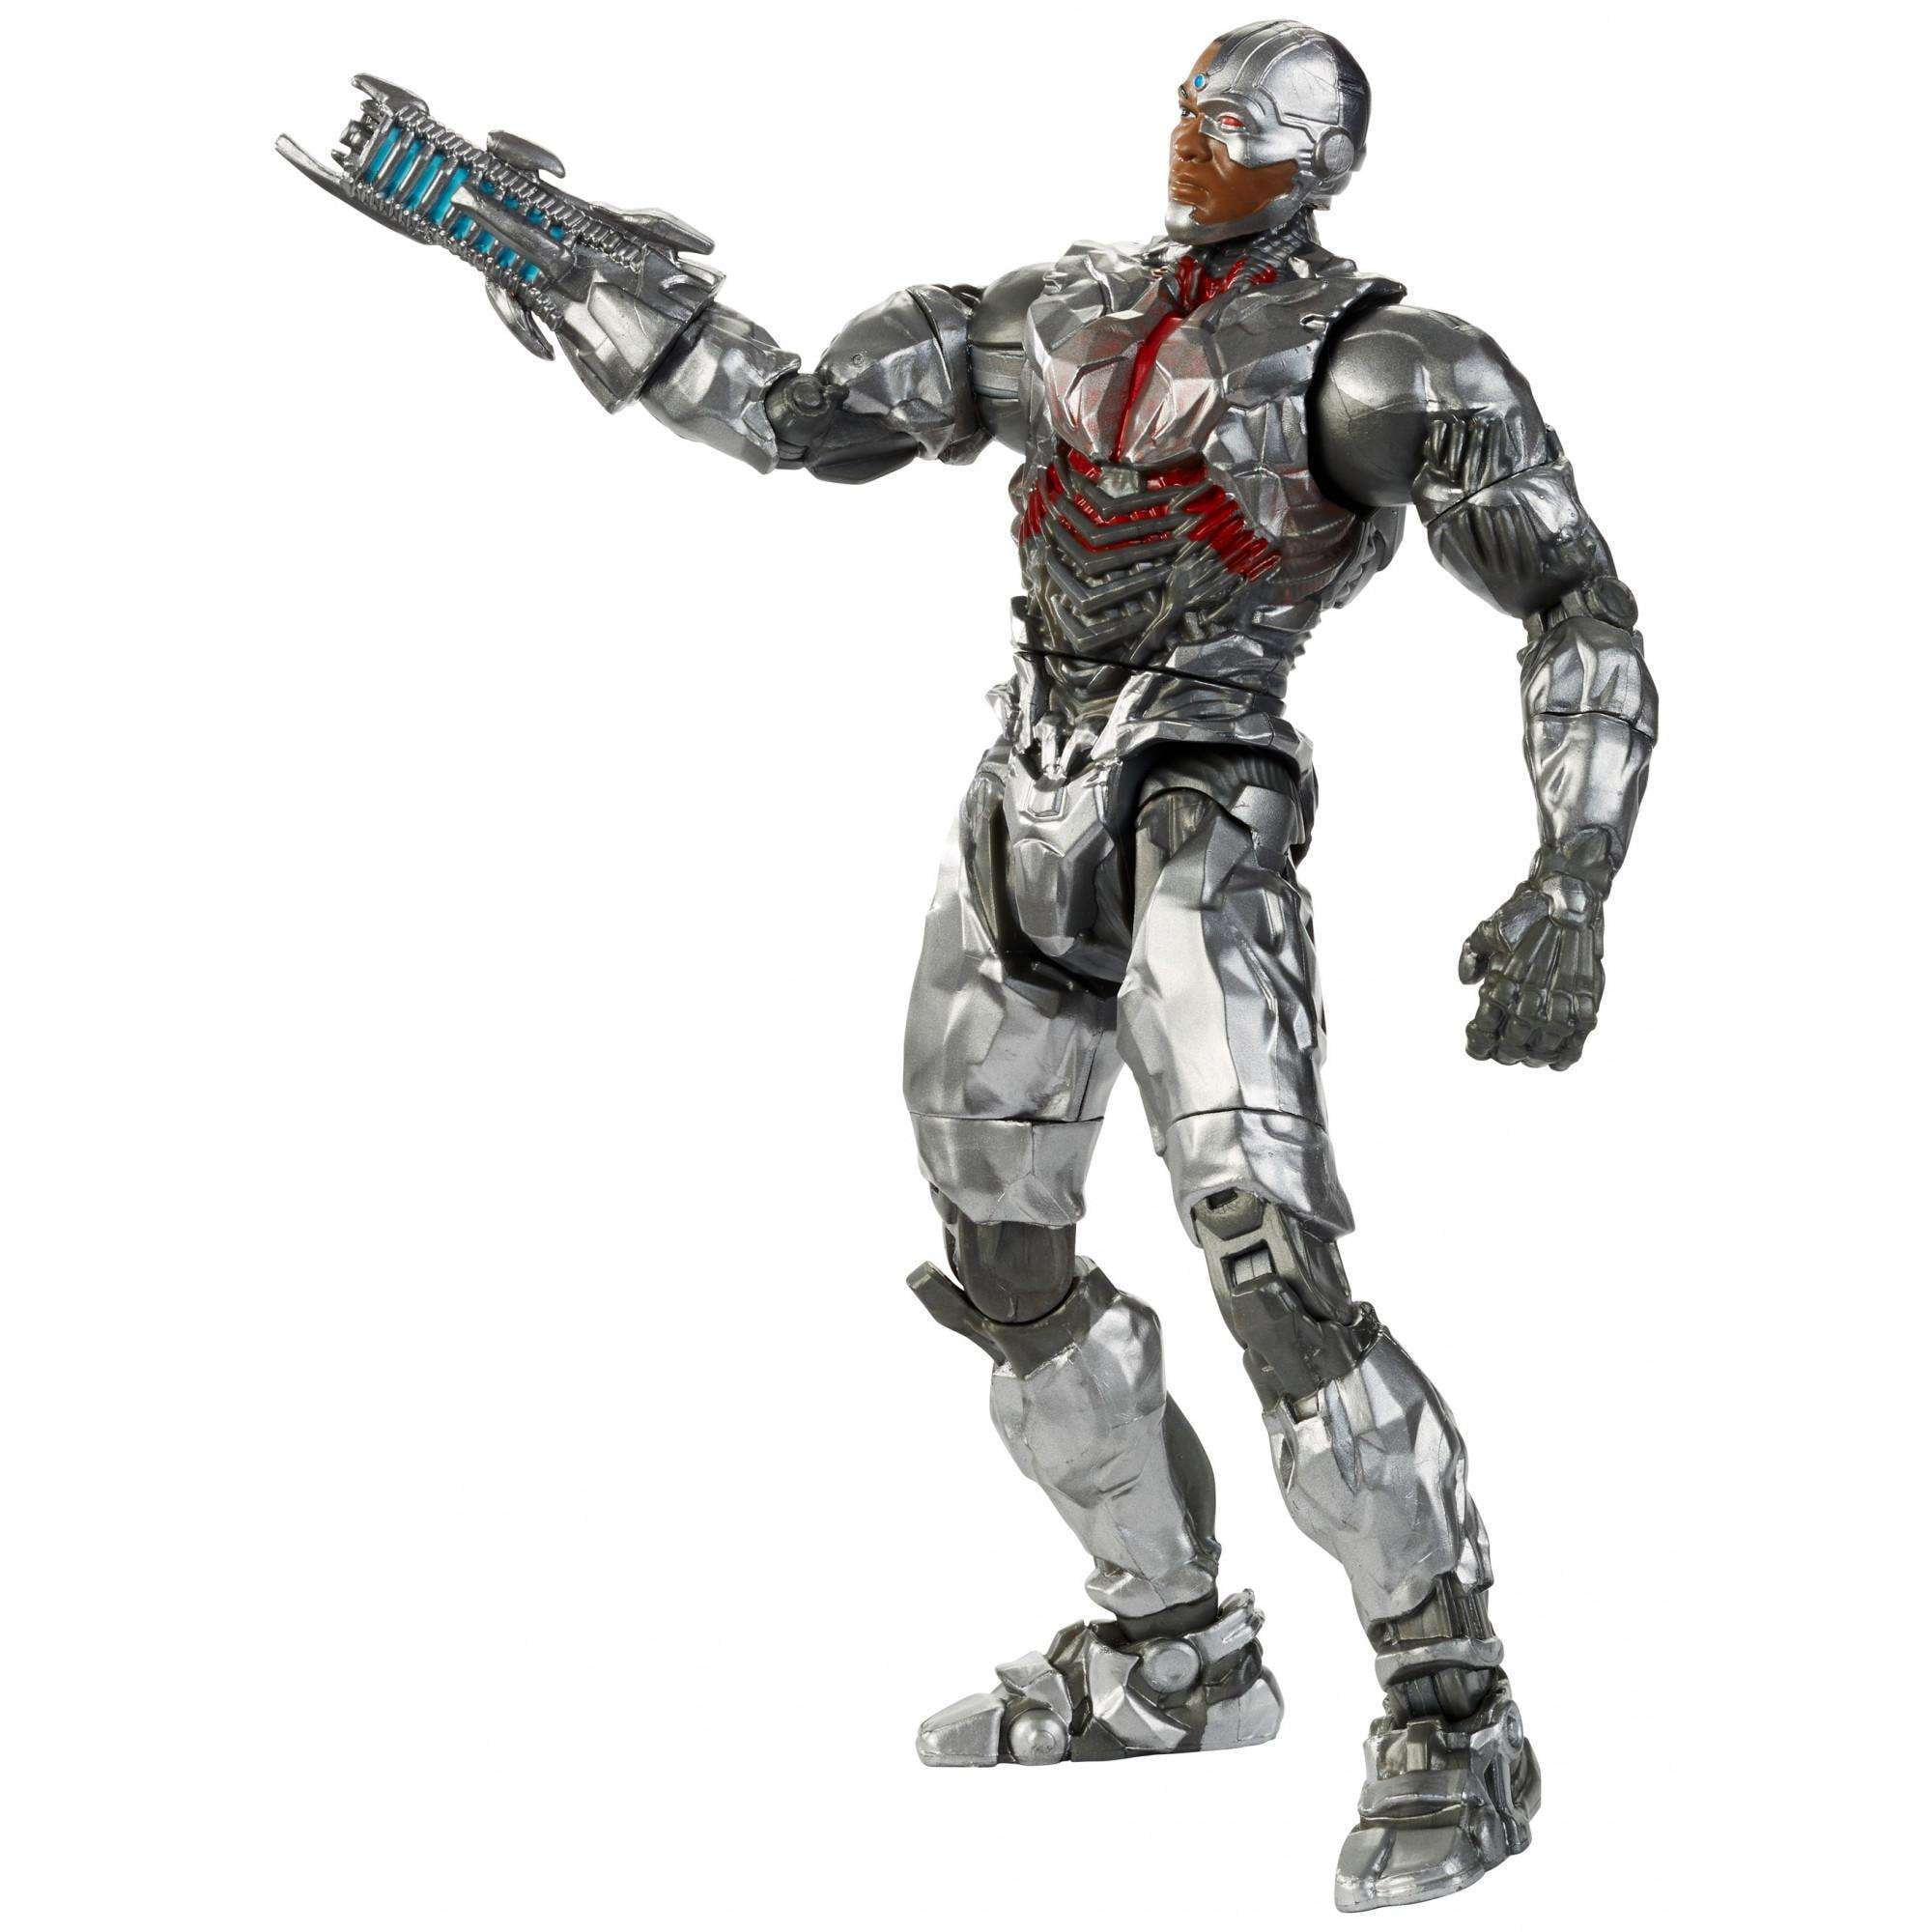 Dc comics Justice league movie Cyborg 1/6 12 inch action figure new loose 